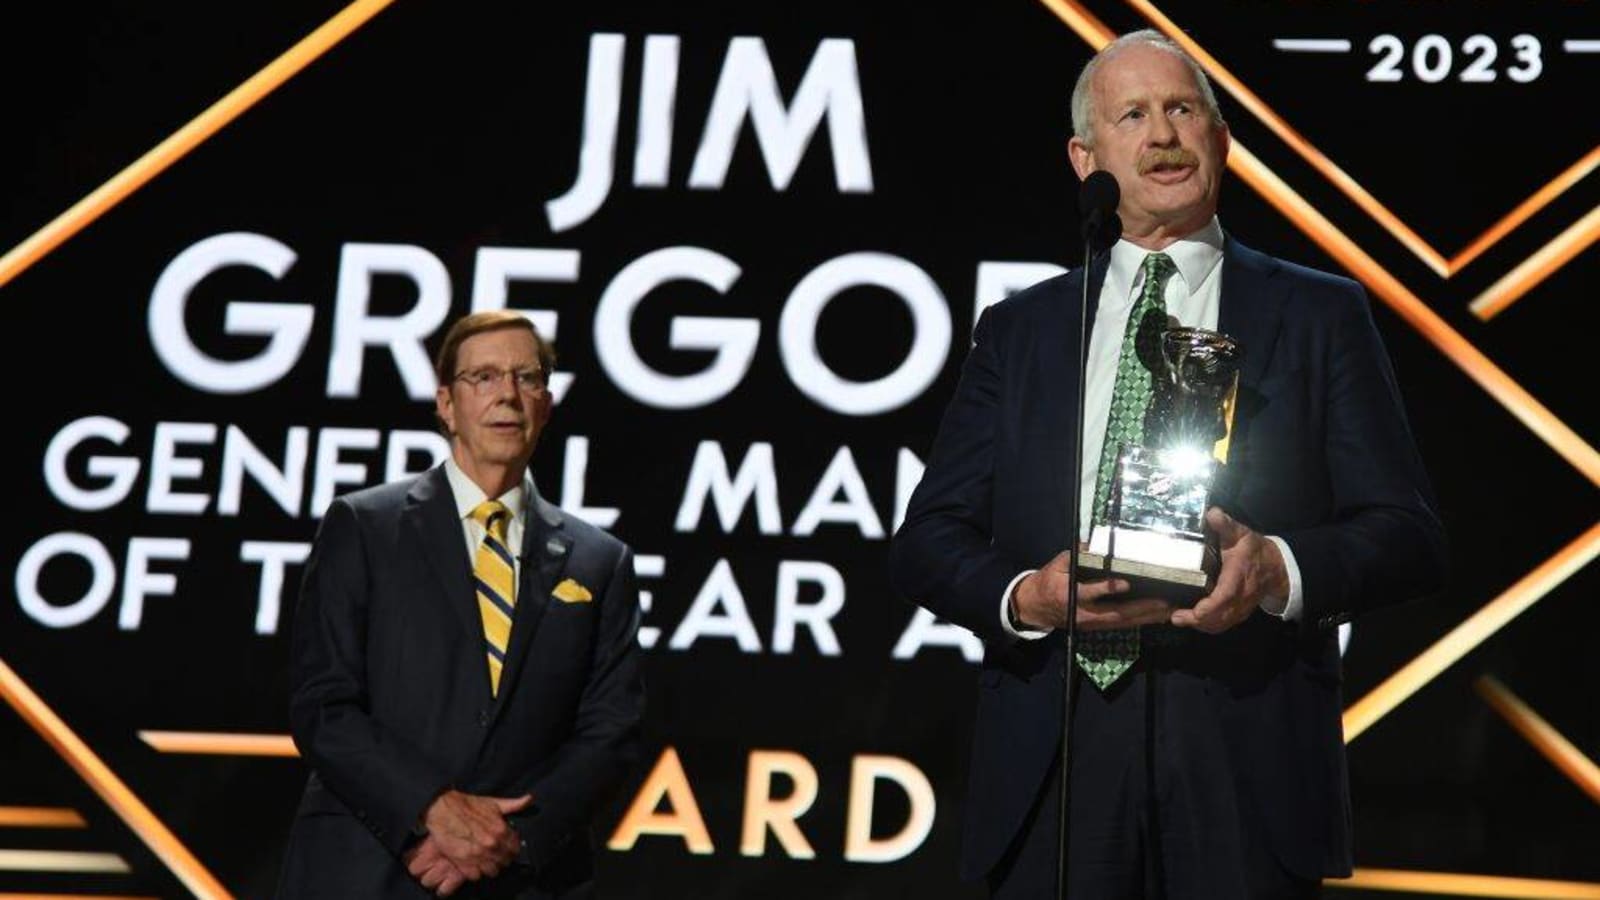 The General Manager for the Dallas Stars Jim Nill Re-Signs a Contract Extension